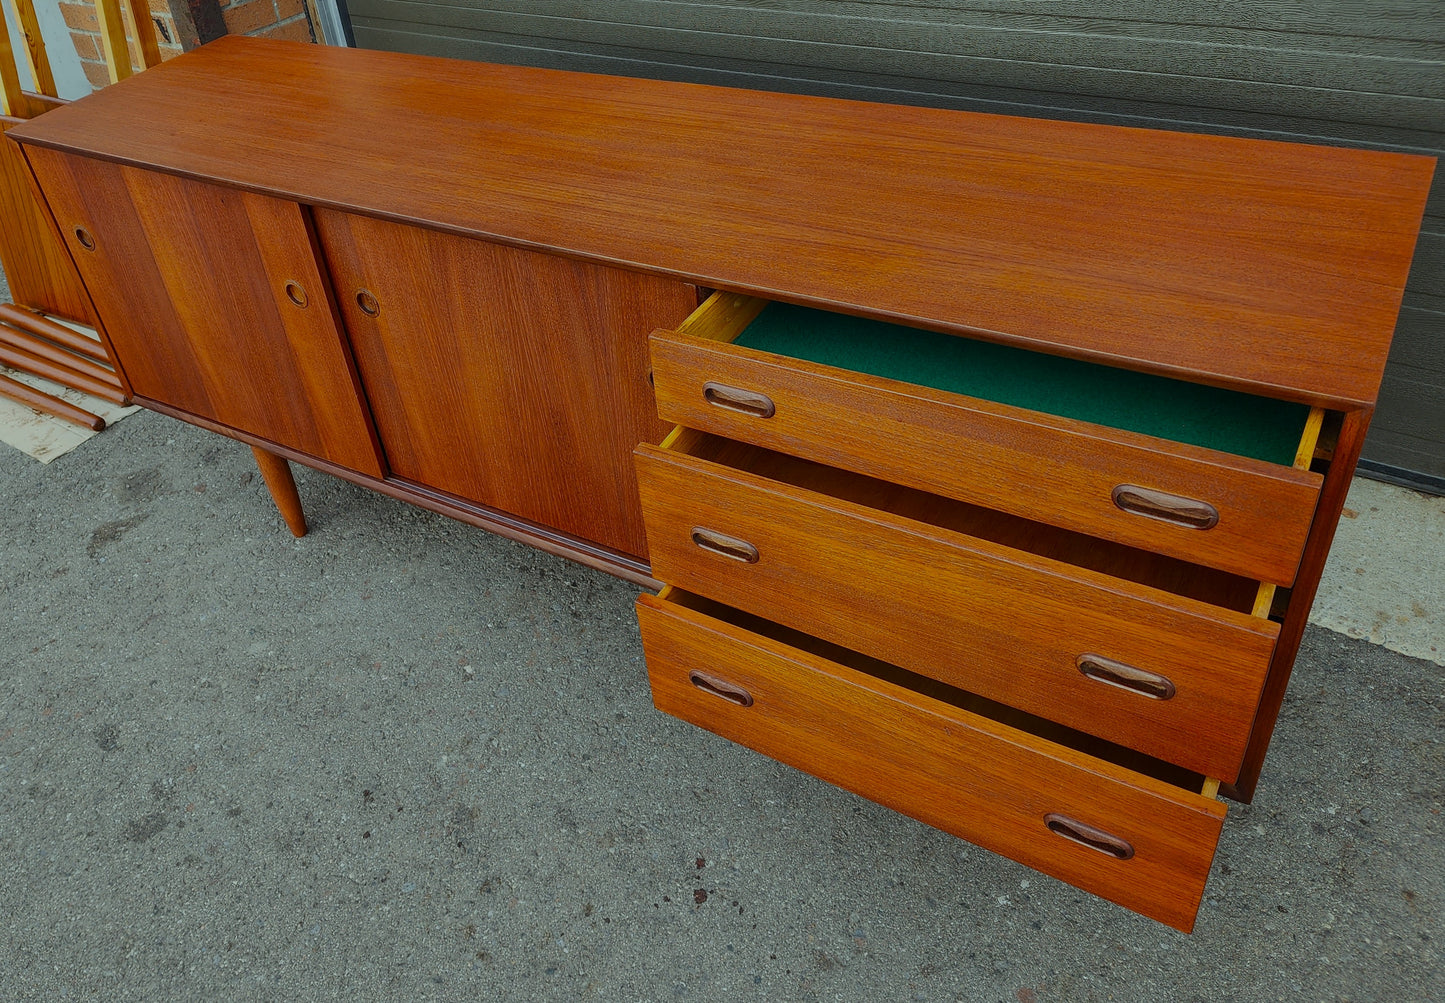 REFINISHED Mid Century Modern Teak Sideboard by Punch Designs 6 ft